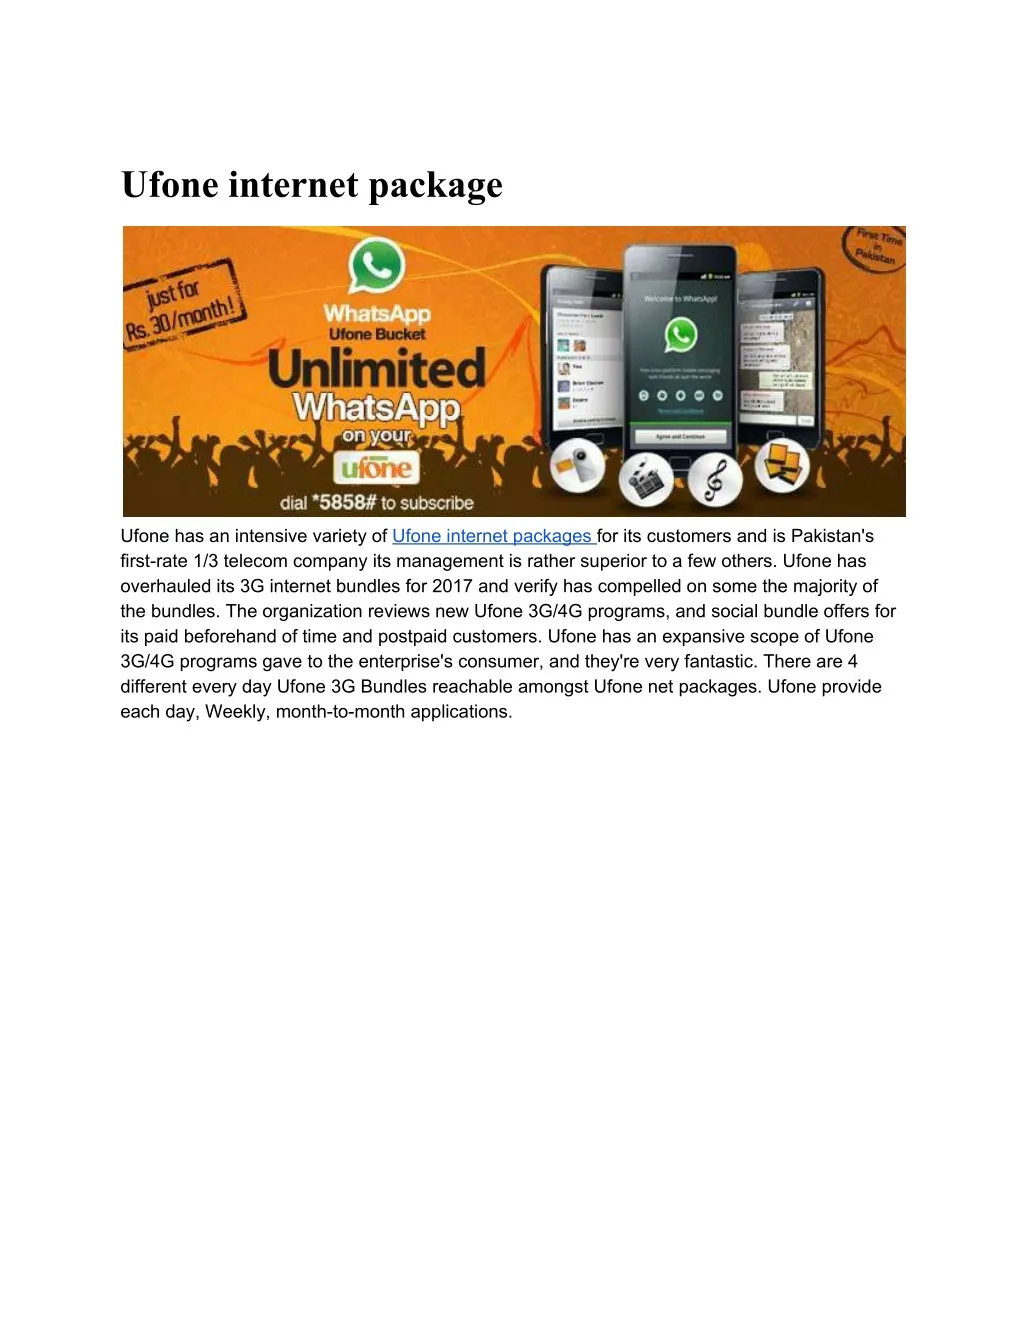 ufone internet package